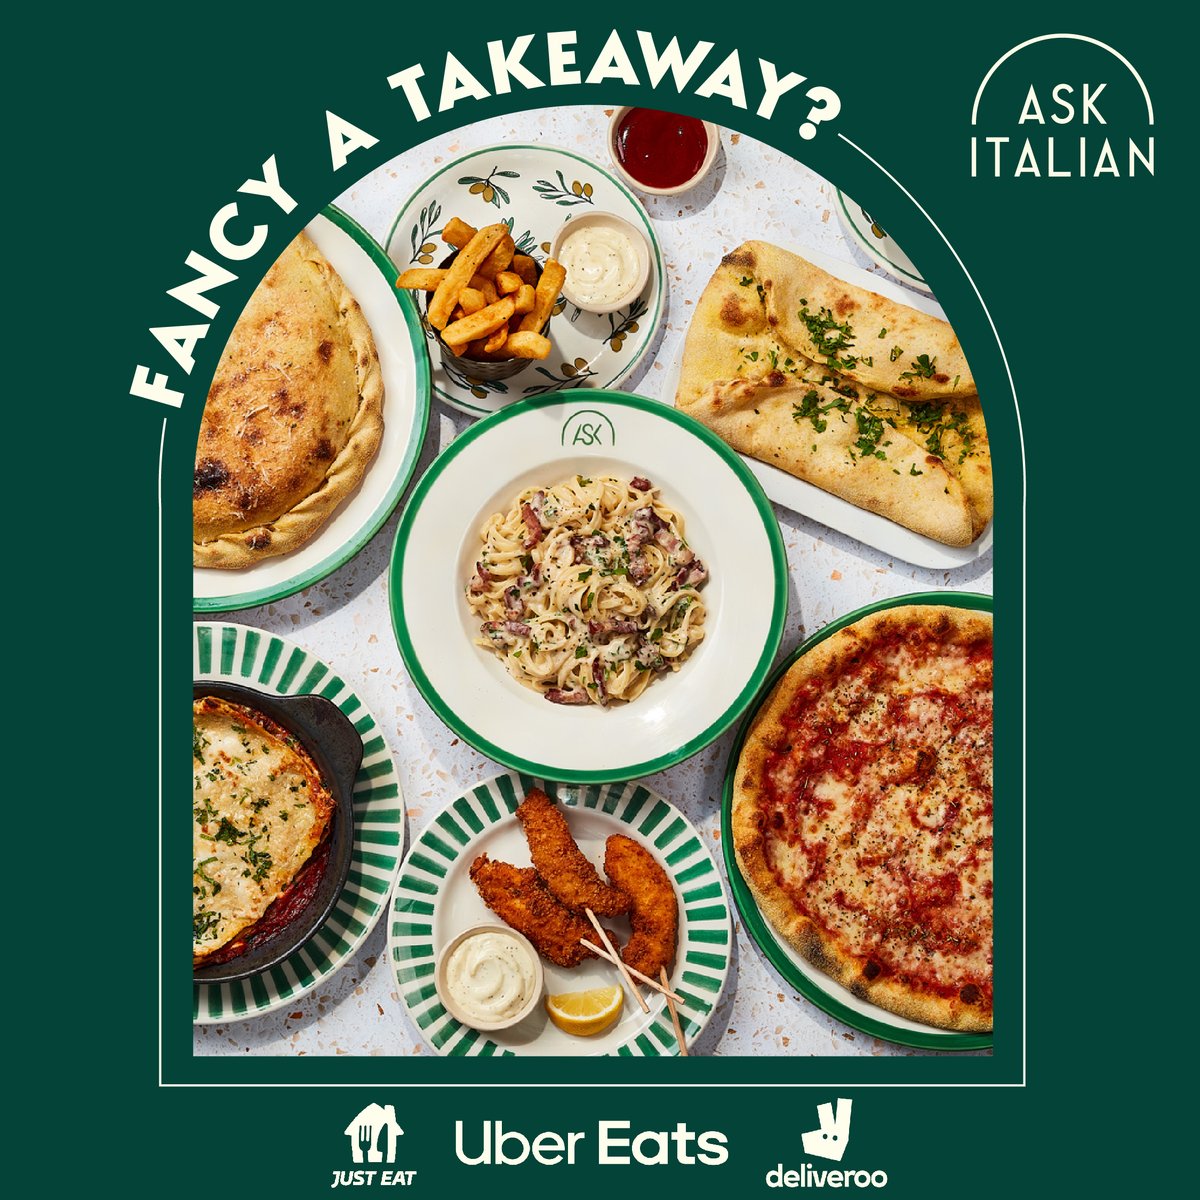 Hey, Durham! Fancy a takeaway for lunch? 🍴🍝 All your favourite ASK Italian dishes are available for delivery. Find them on Just Eat UK, Uber Eats and Deliveroo! 👉🏾 bit.ly/ASK_Walkergate